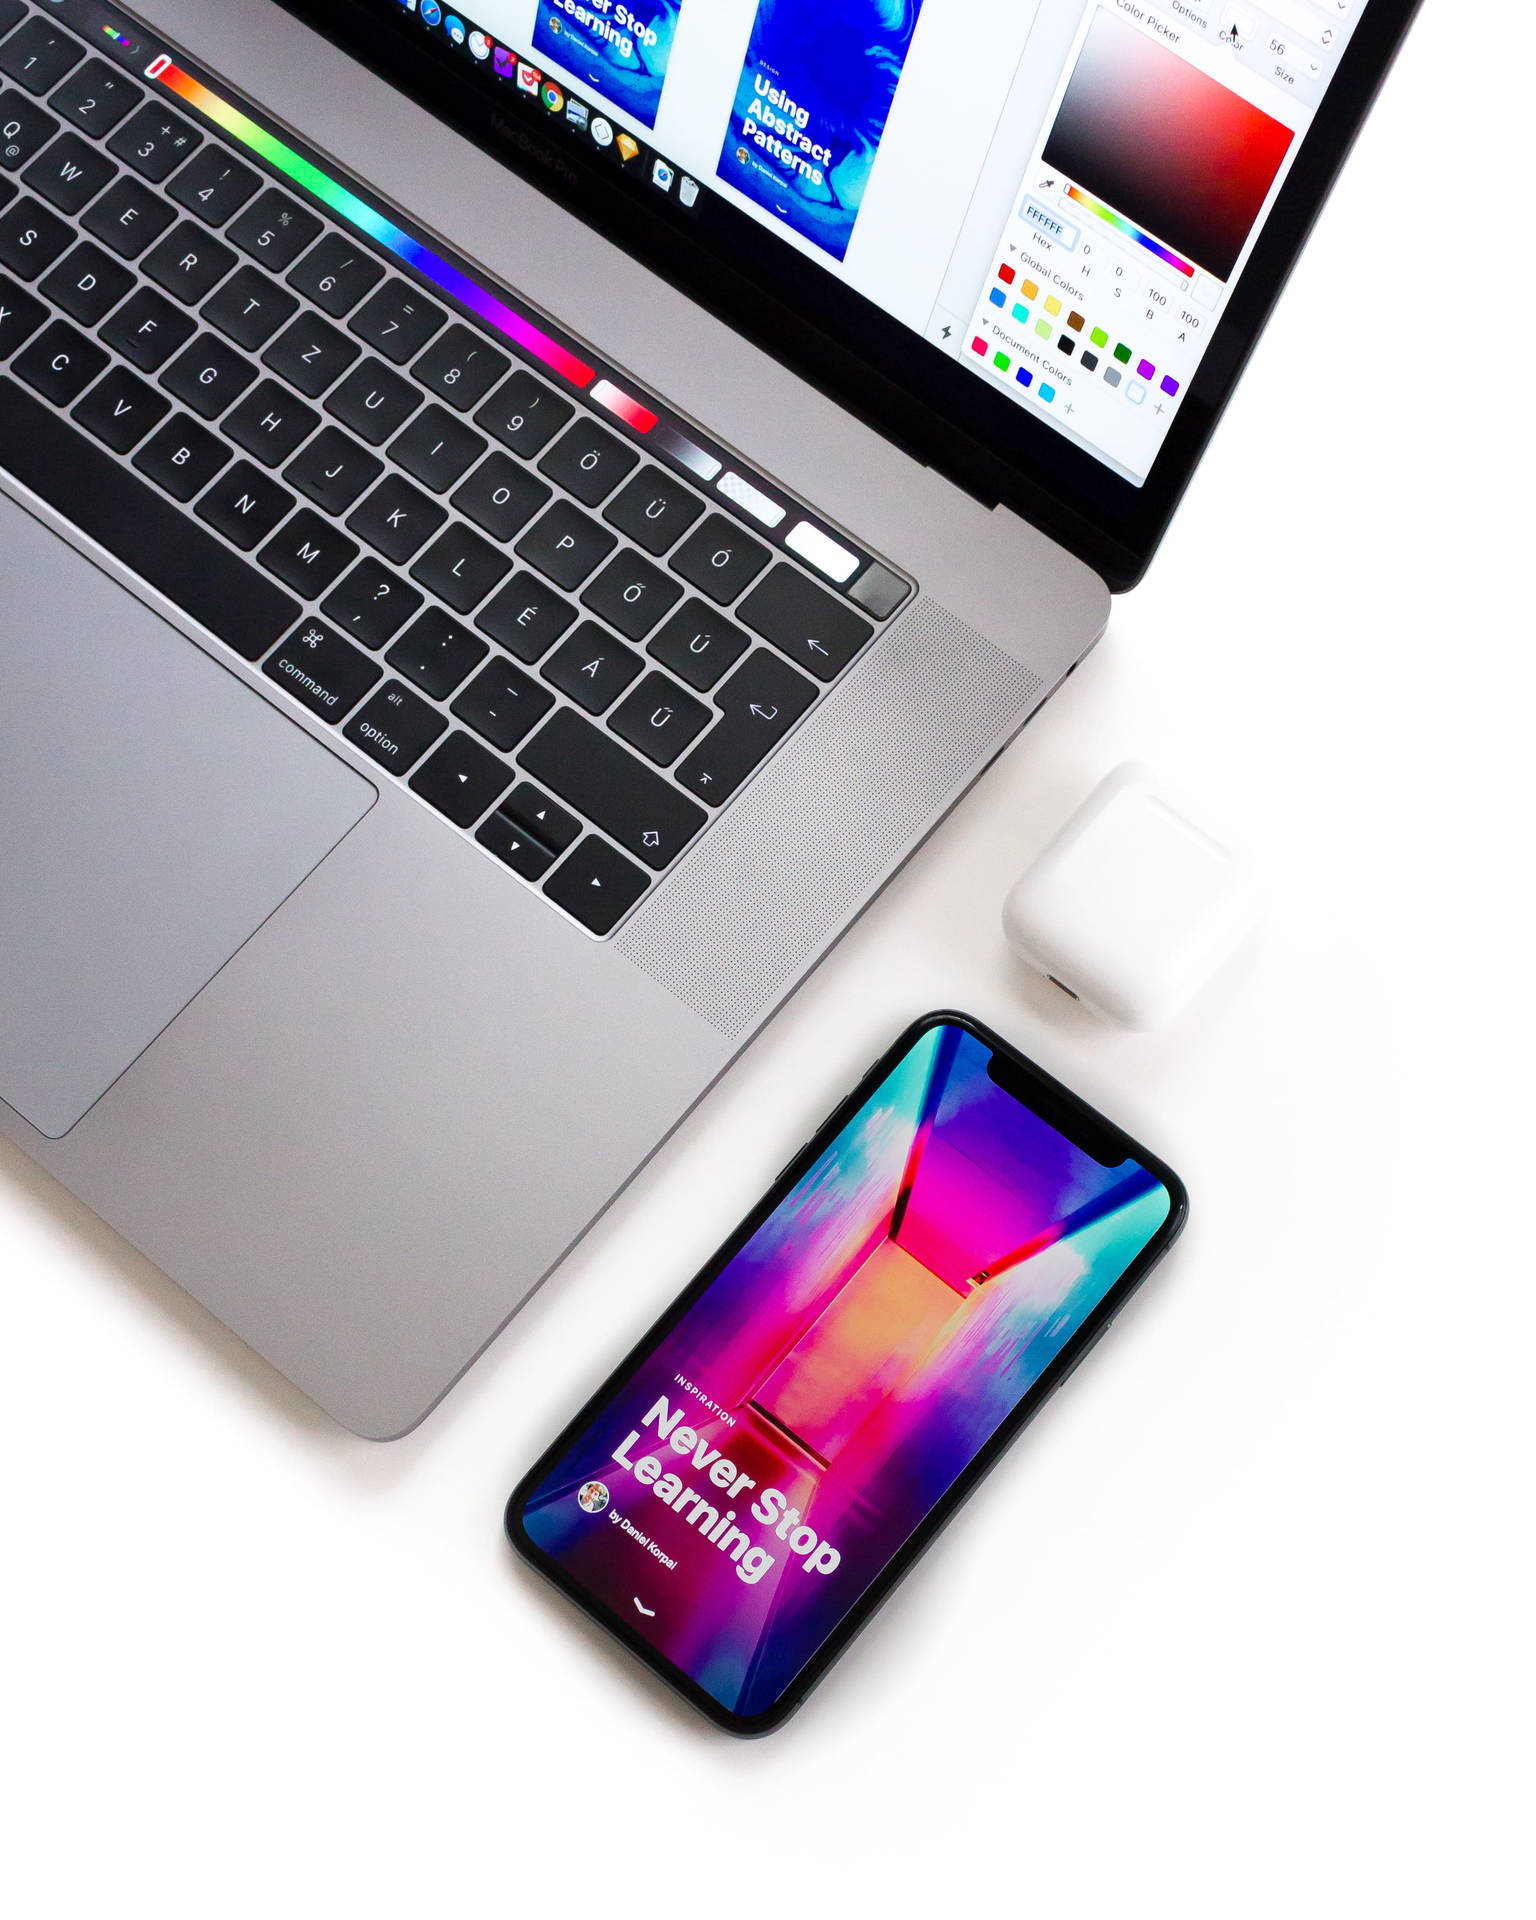 Iphone Desk With Colorful Phone Screen Wallpaper